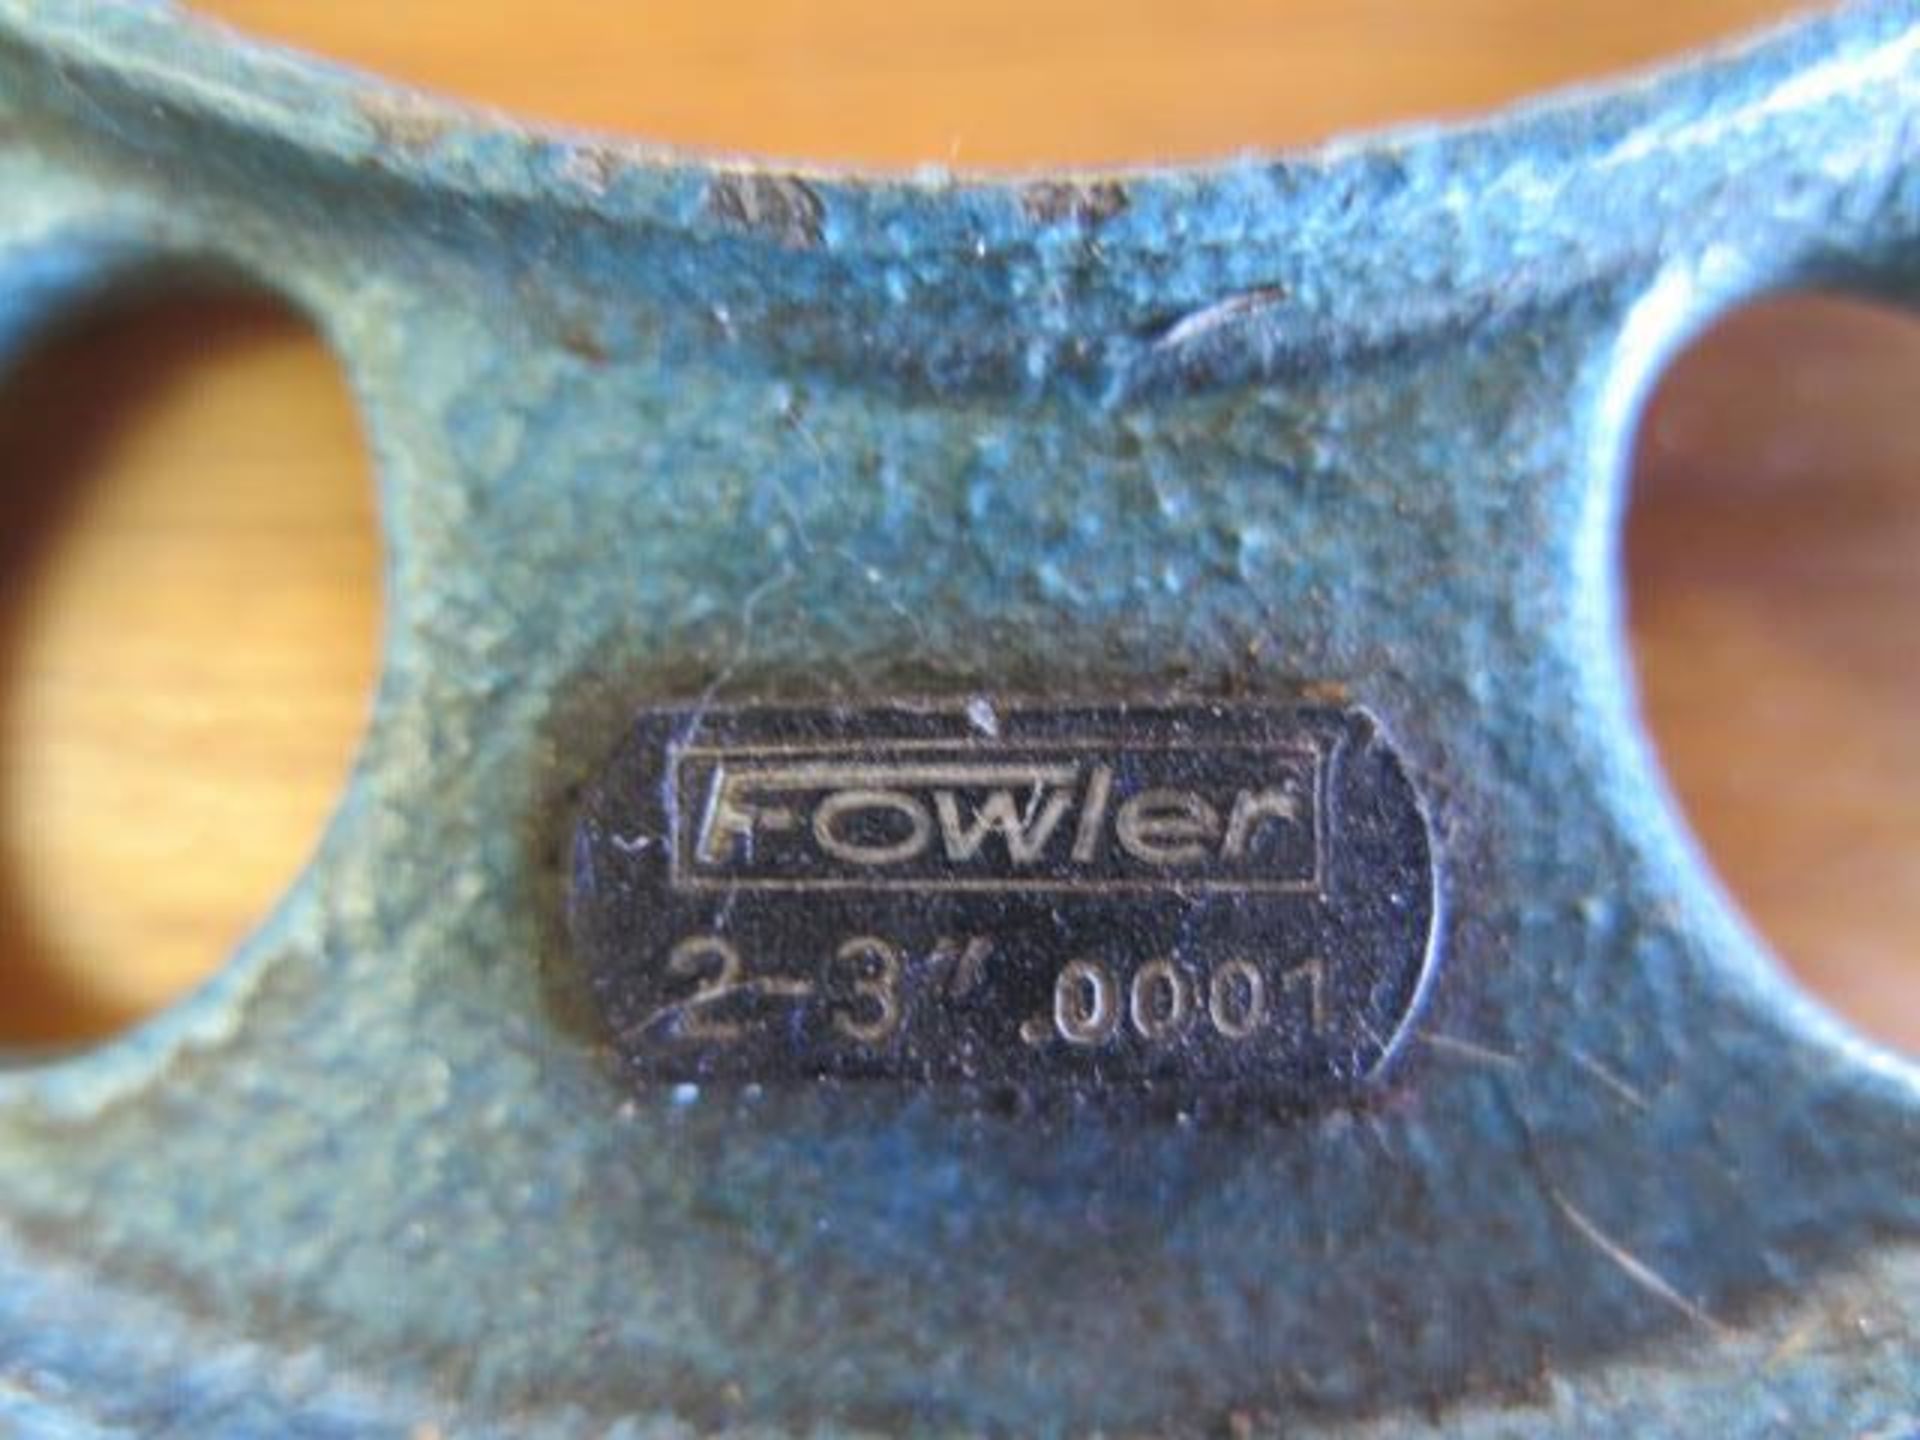 Fowler 0-12” OD Mic Set (SOLD AS-IS - NO WARRANTY) - Image 6 of 6